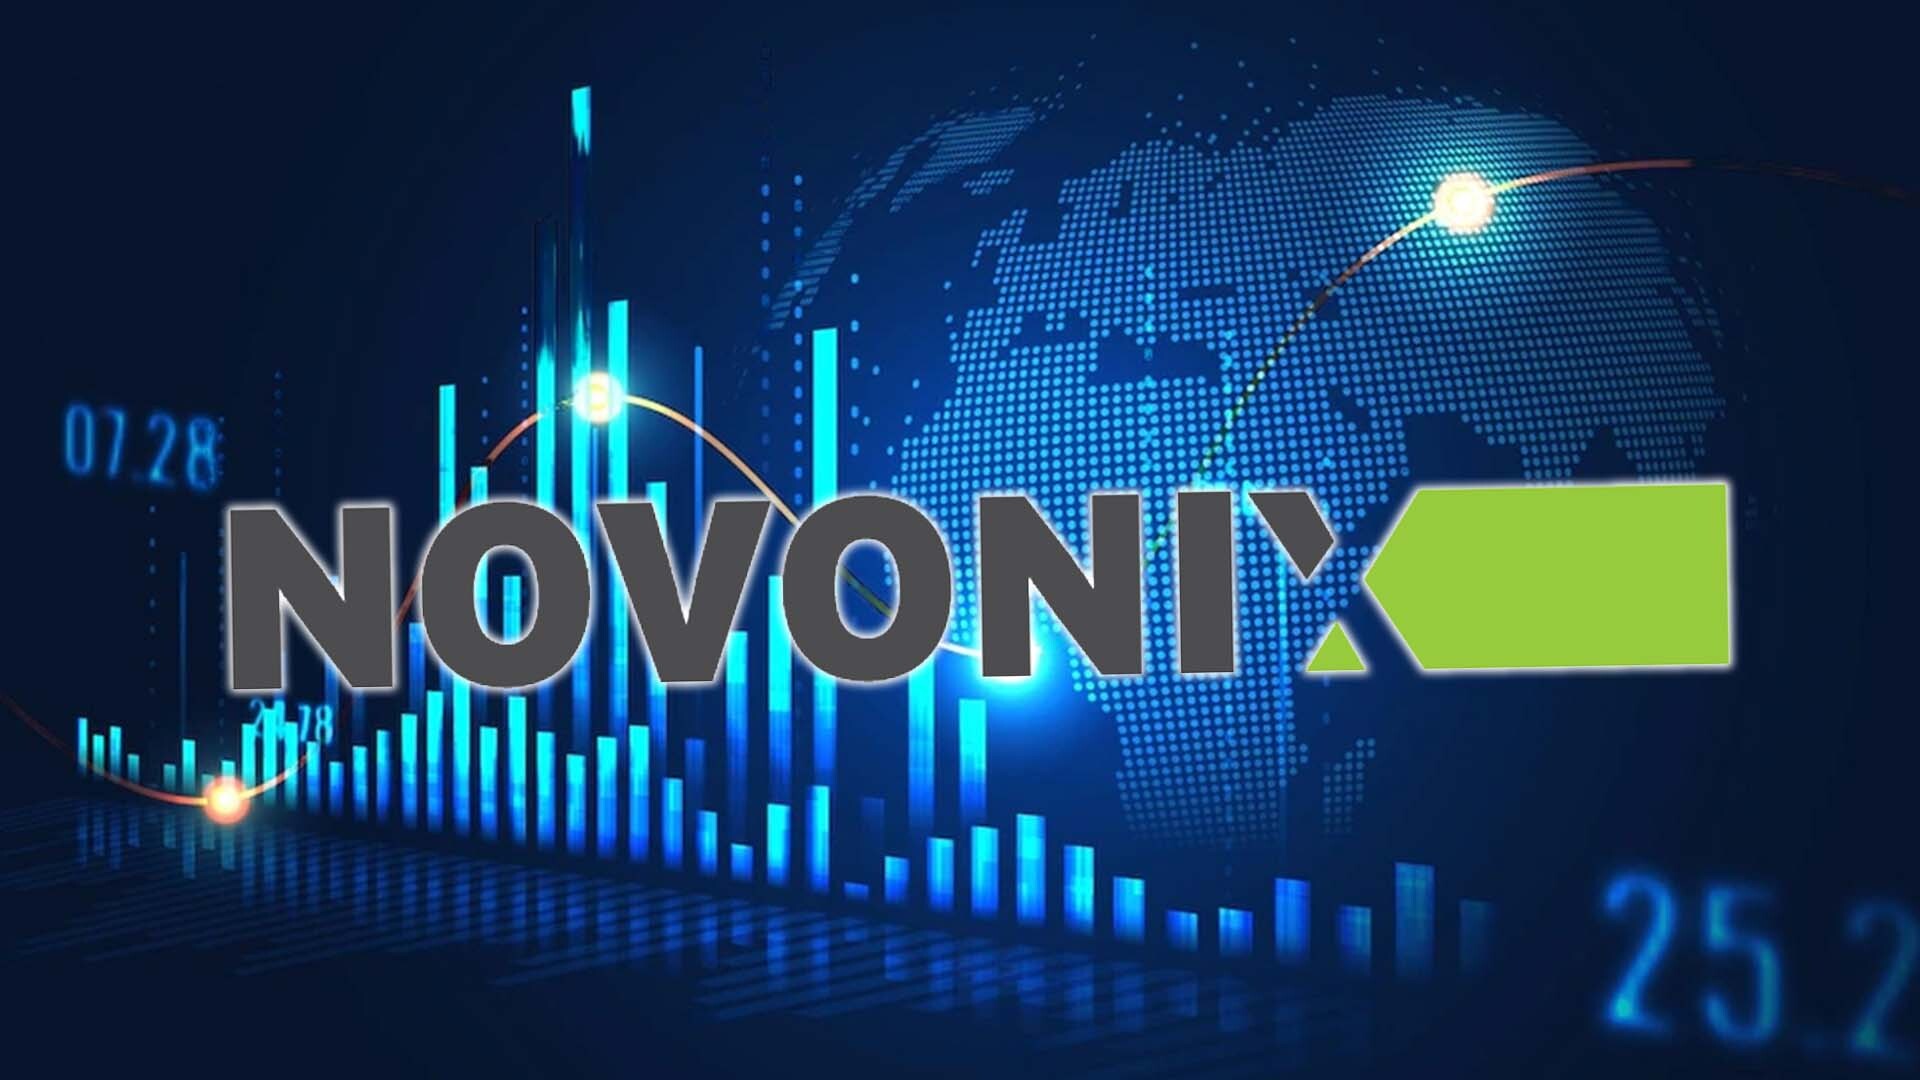 Novonix Stock Price Seems ‘Under the Weather’, Good to Invest in FY2023?